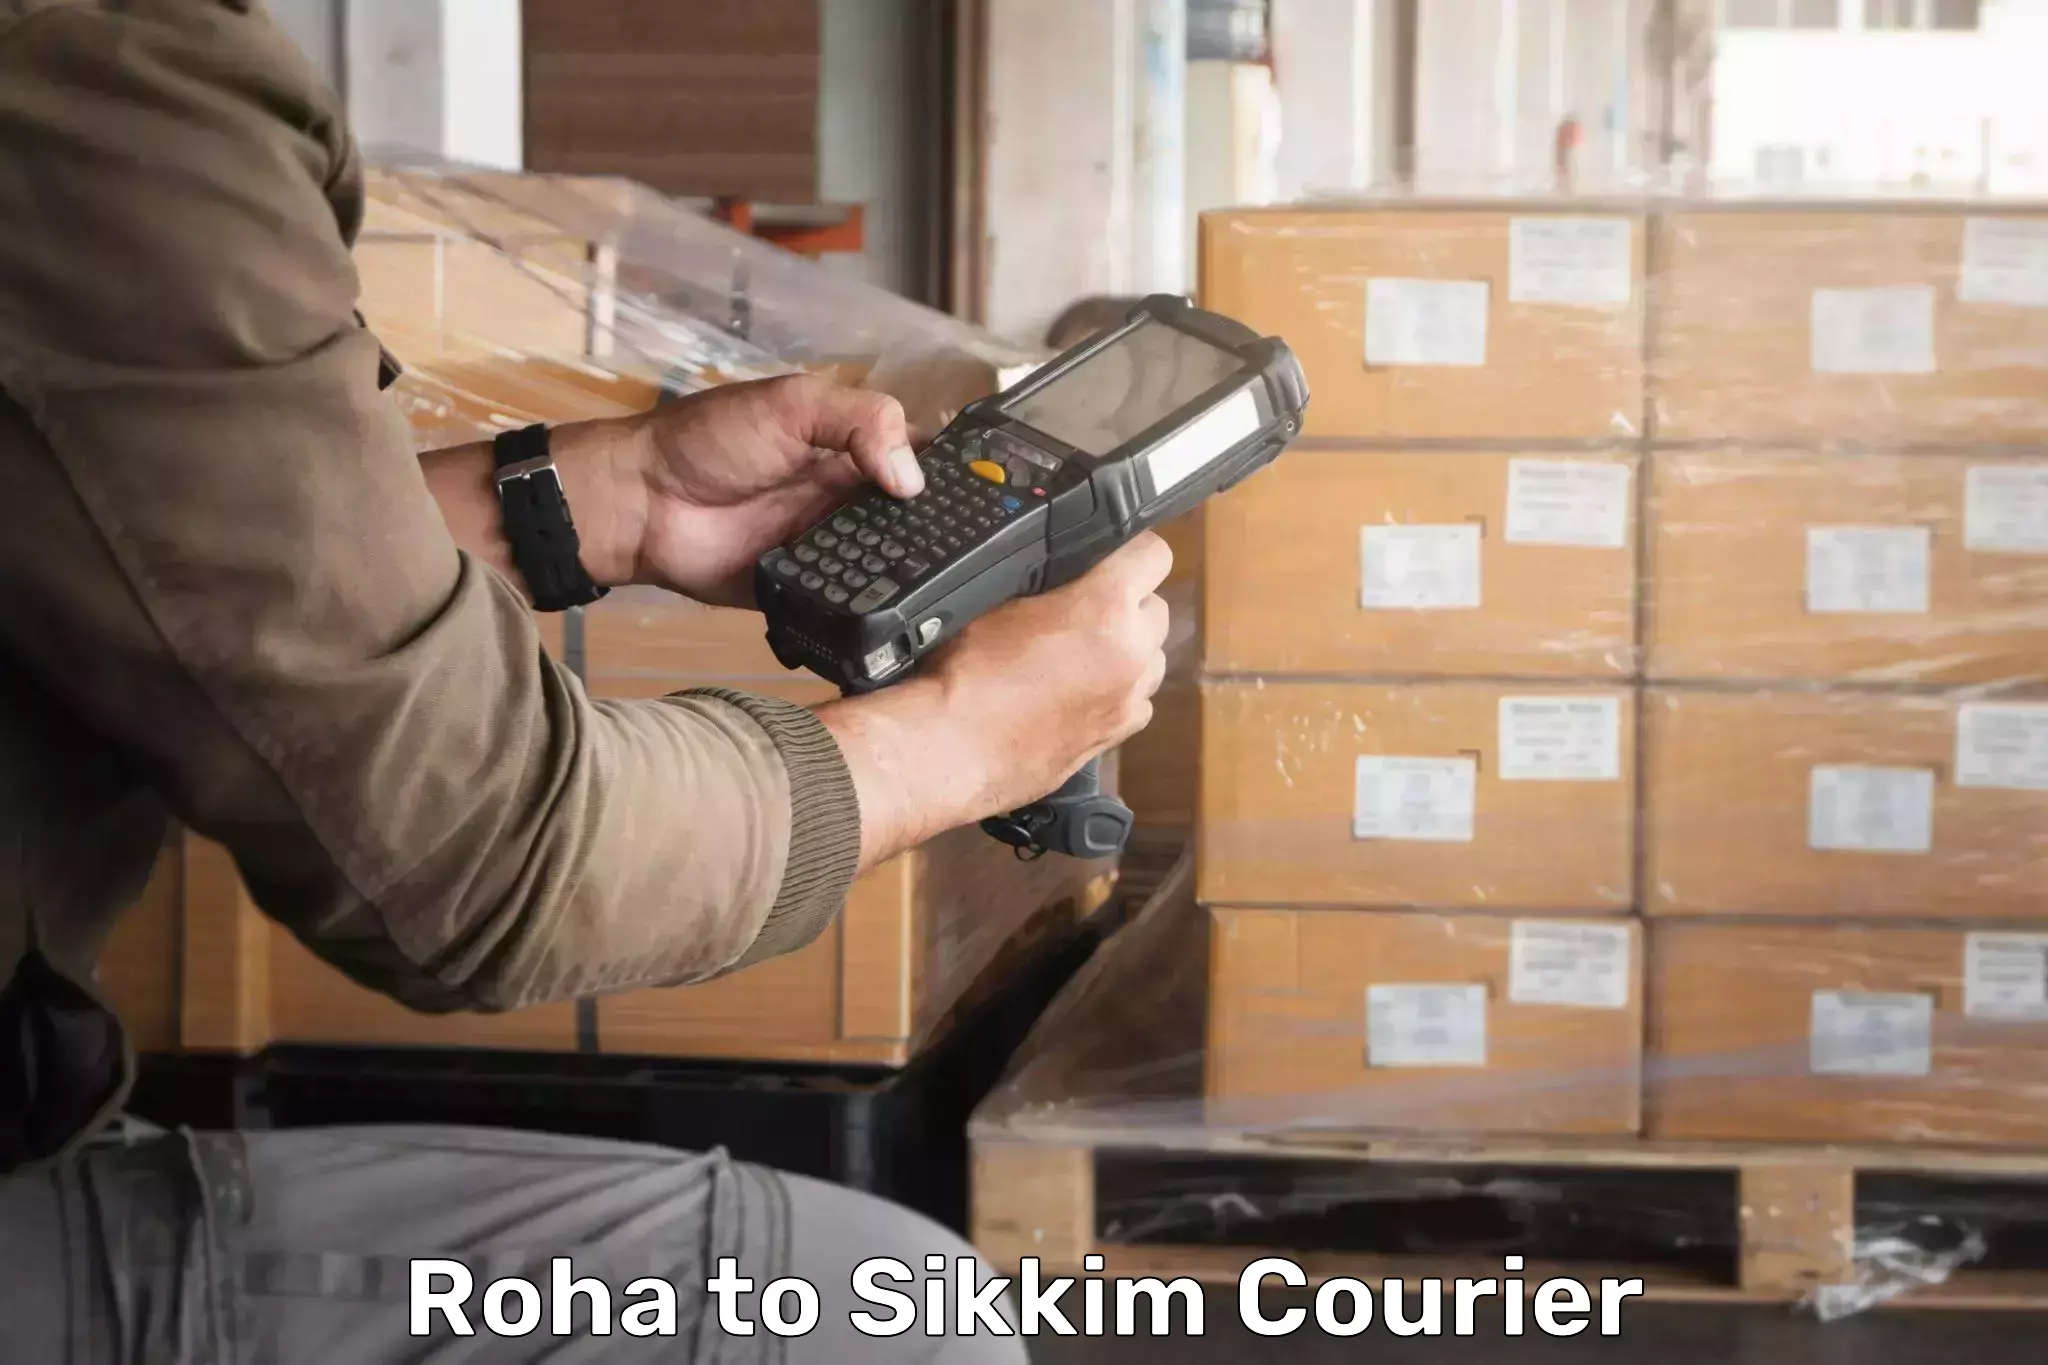 Pharmaceutical courier Roha to Sikkim